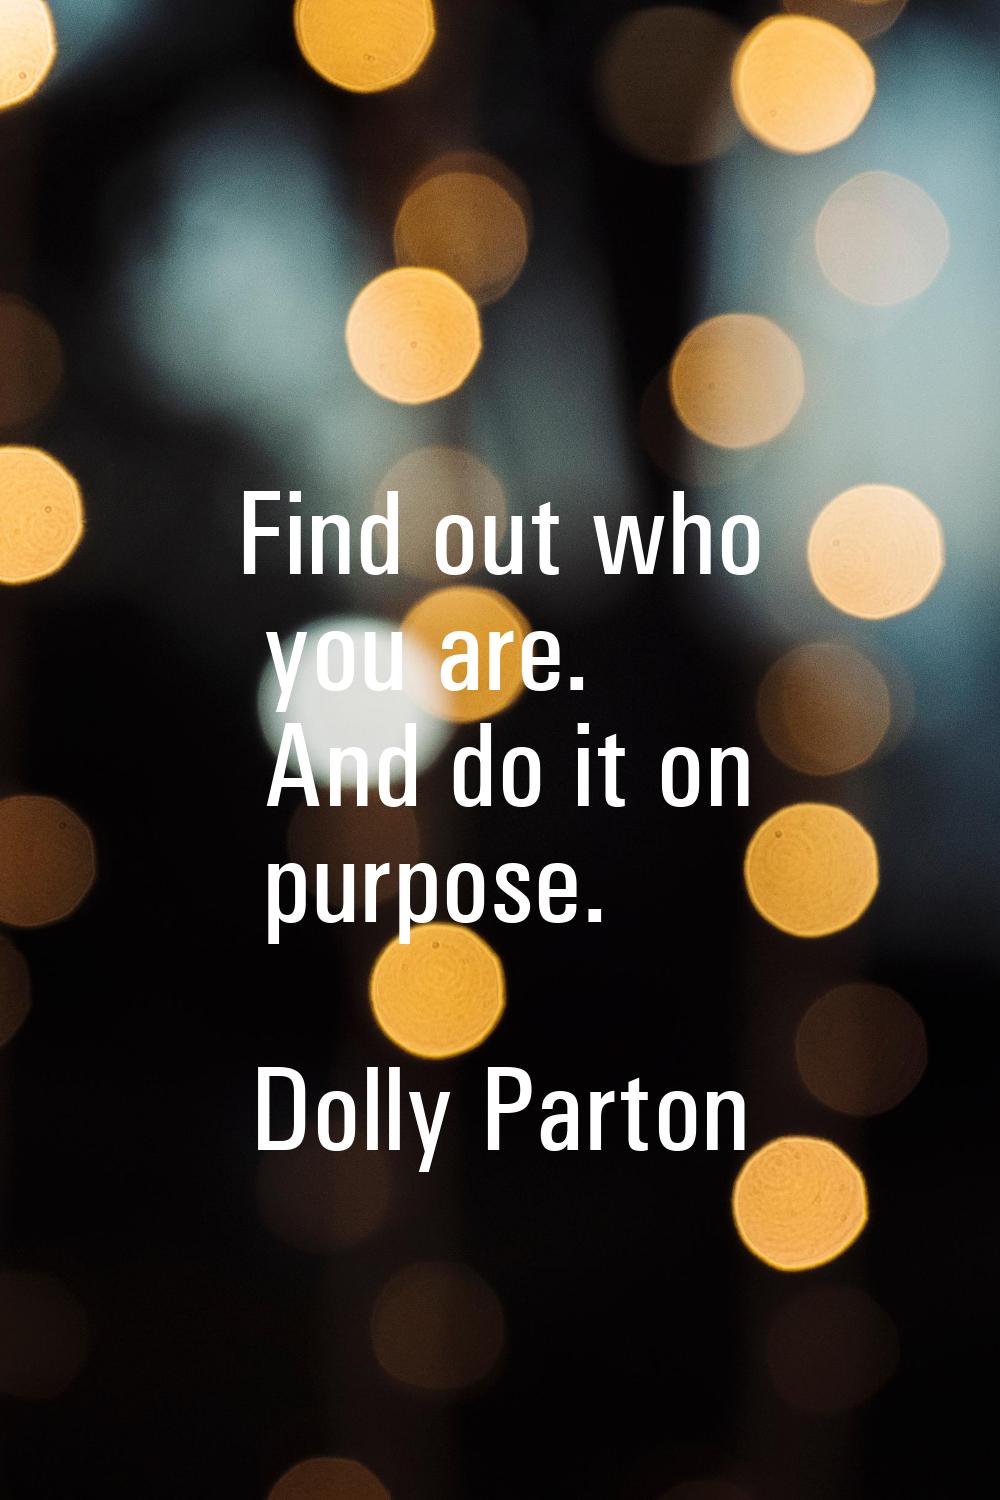 Find out who you are. And do it on purpose.